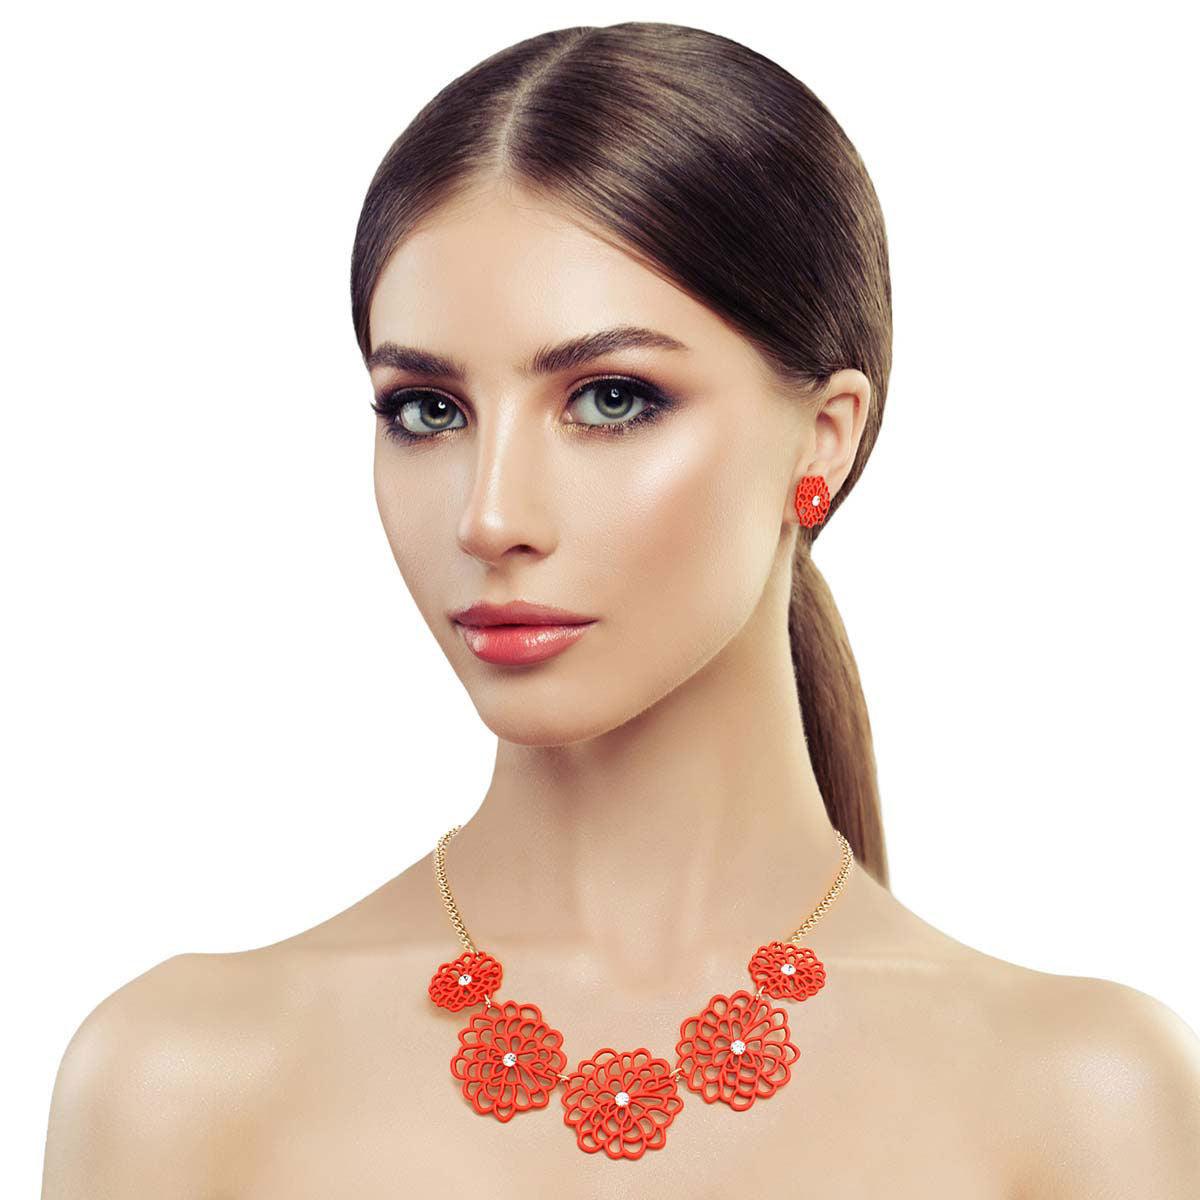 Red Flower Station Necklace Set - Add a Touch of Beauty to Your Look